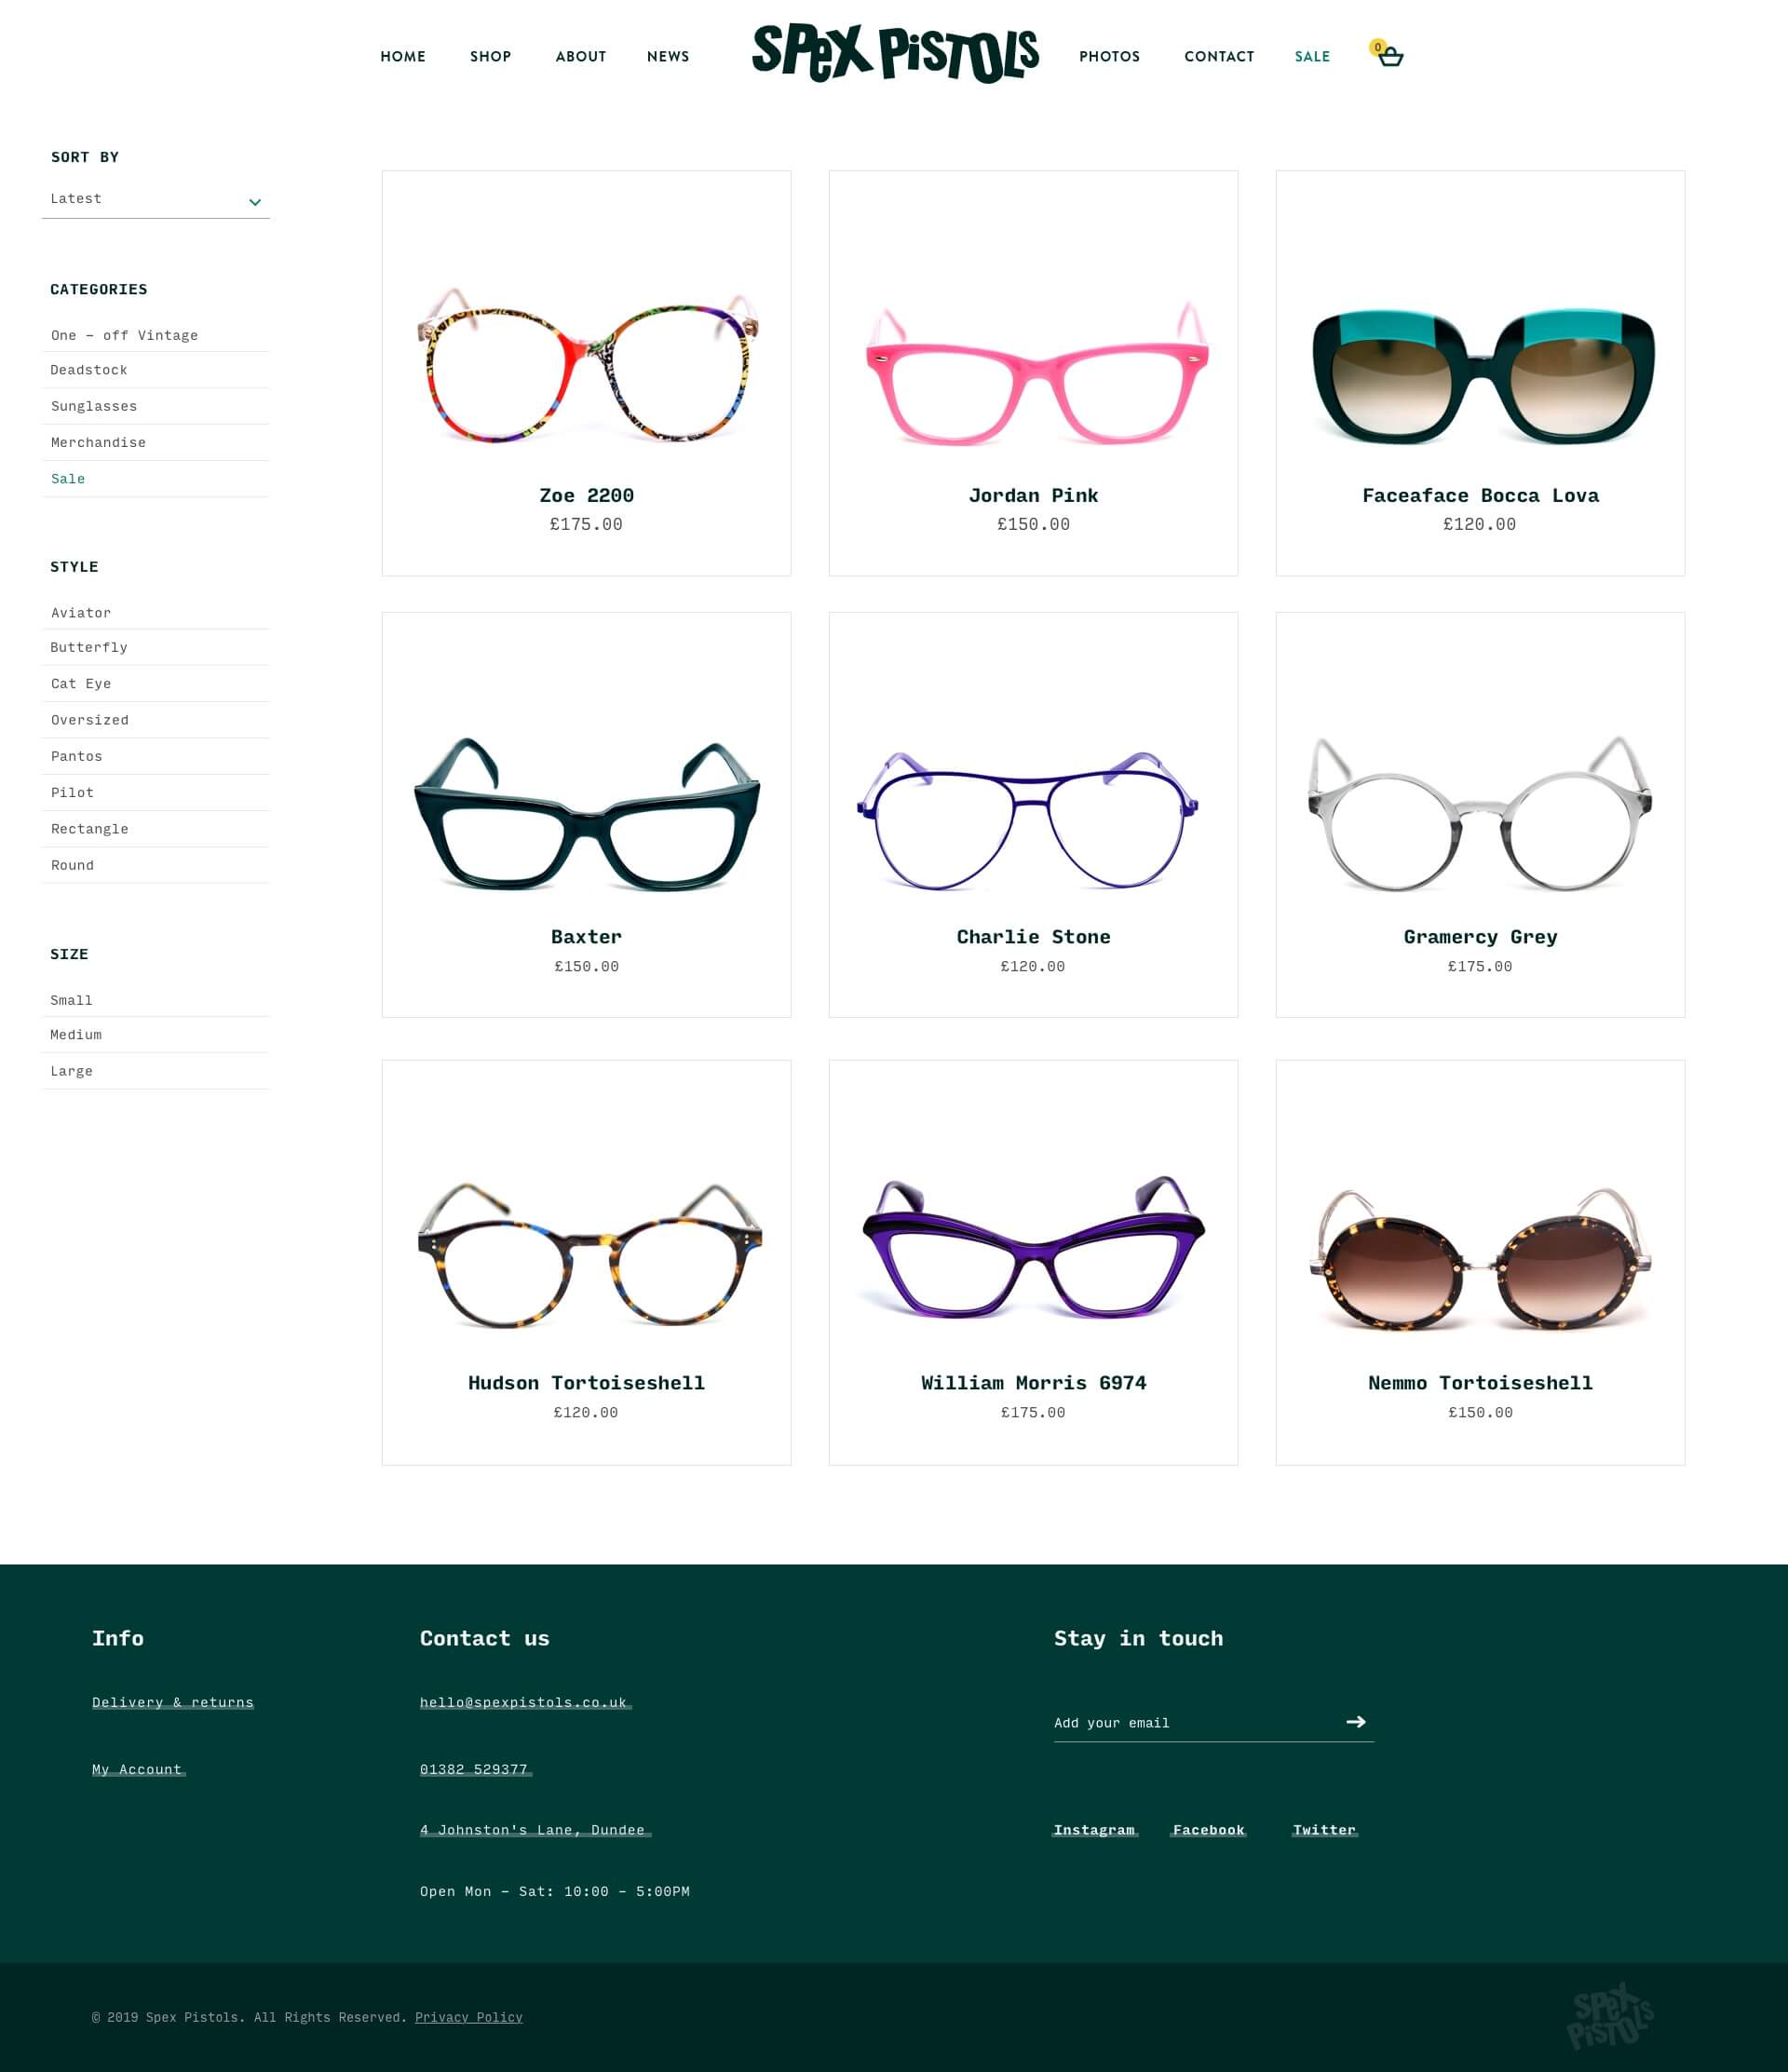 The shop page from the Spex Pistols website showcasing the range of frames, retro glasses and vintage spectacles that they stock.